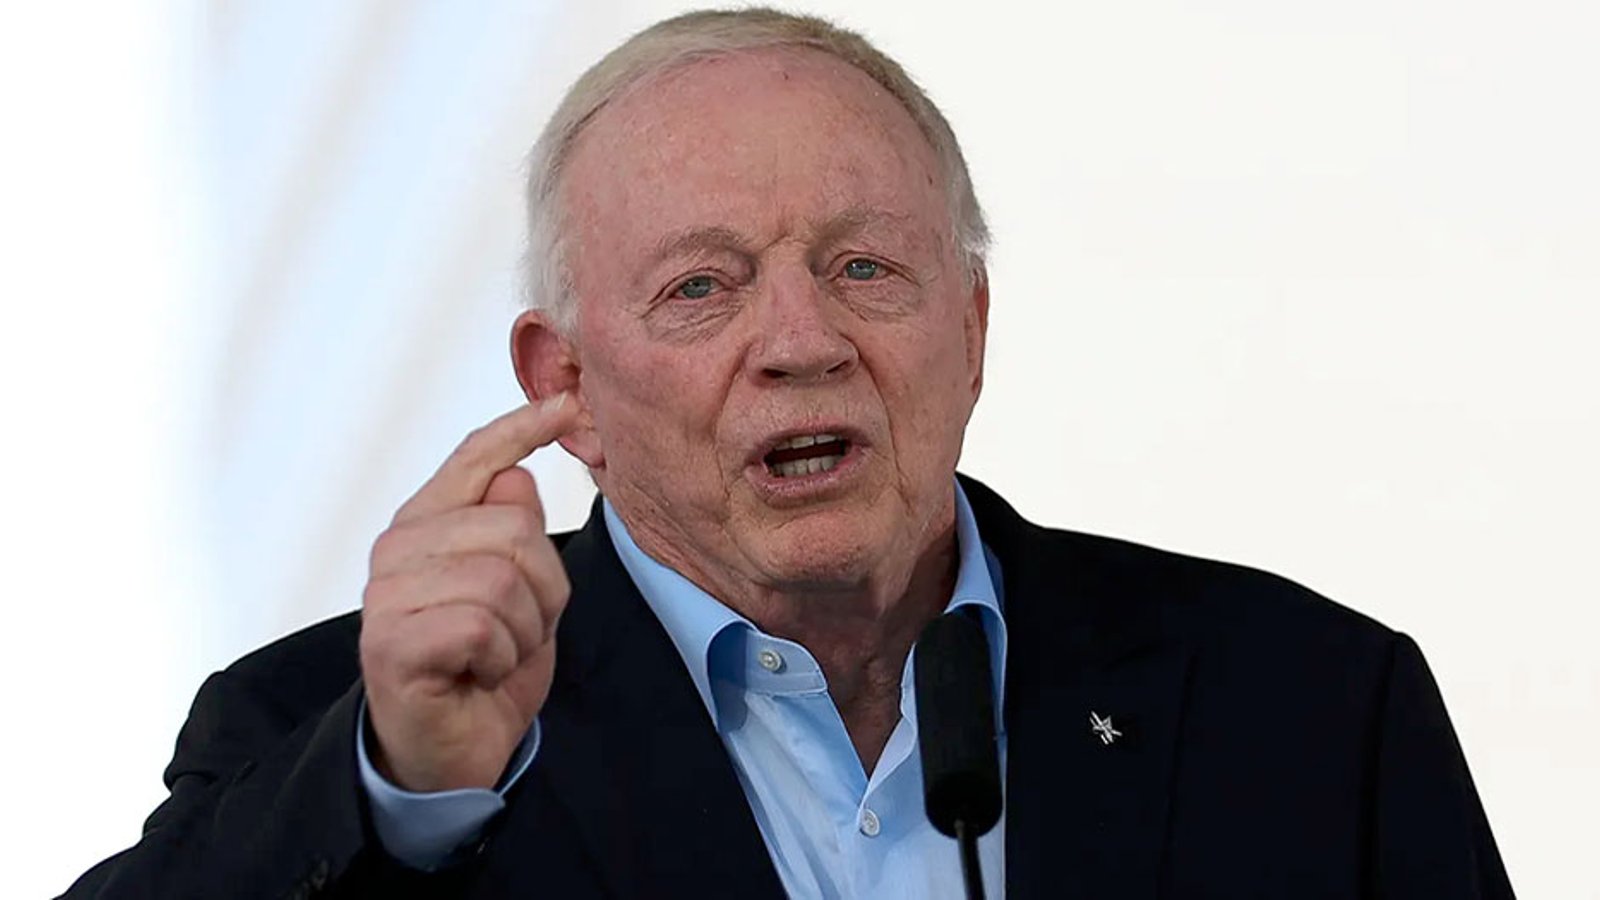 Jerry Jones apologizes for using “offensive” terminology 